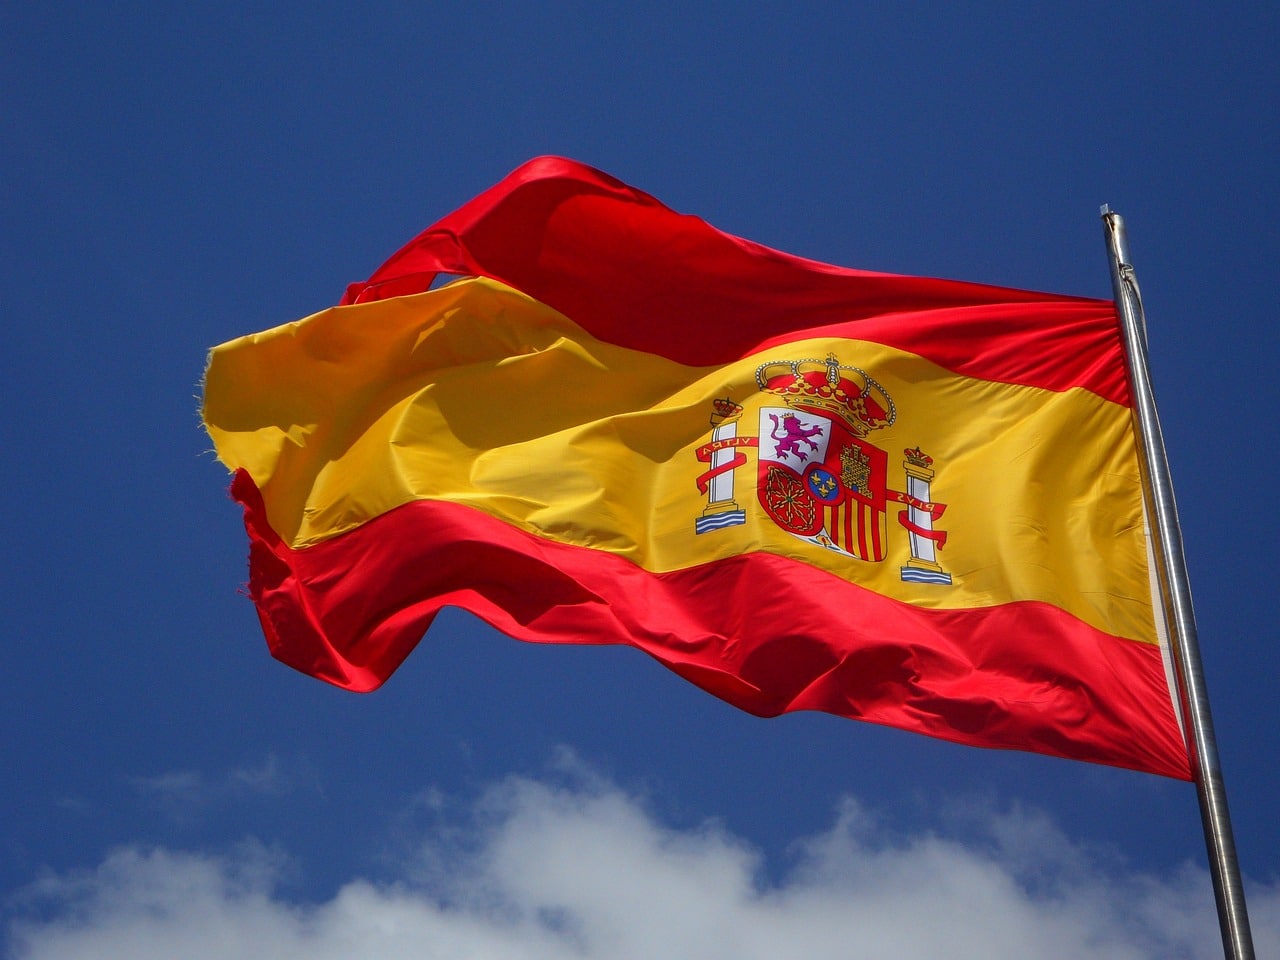 Private Banking Firm with $14B Assets Launches Spain’s First Crypto Fund- Bitcoin (BTC) Set For More Adoption In Europe